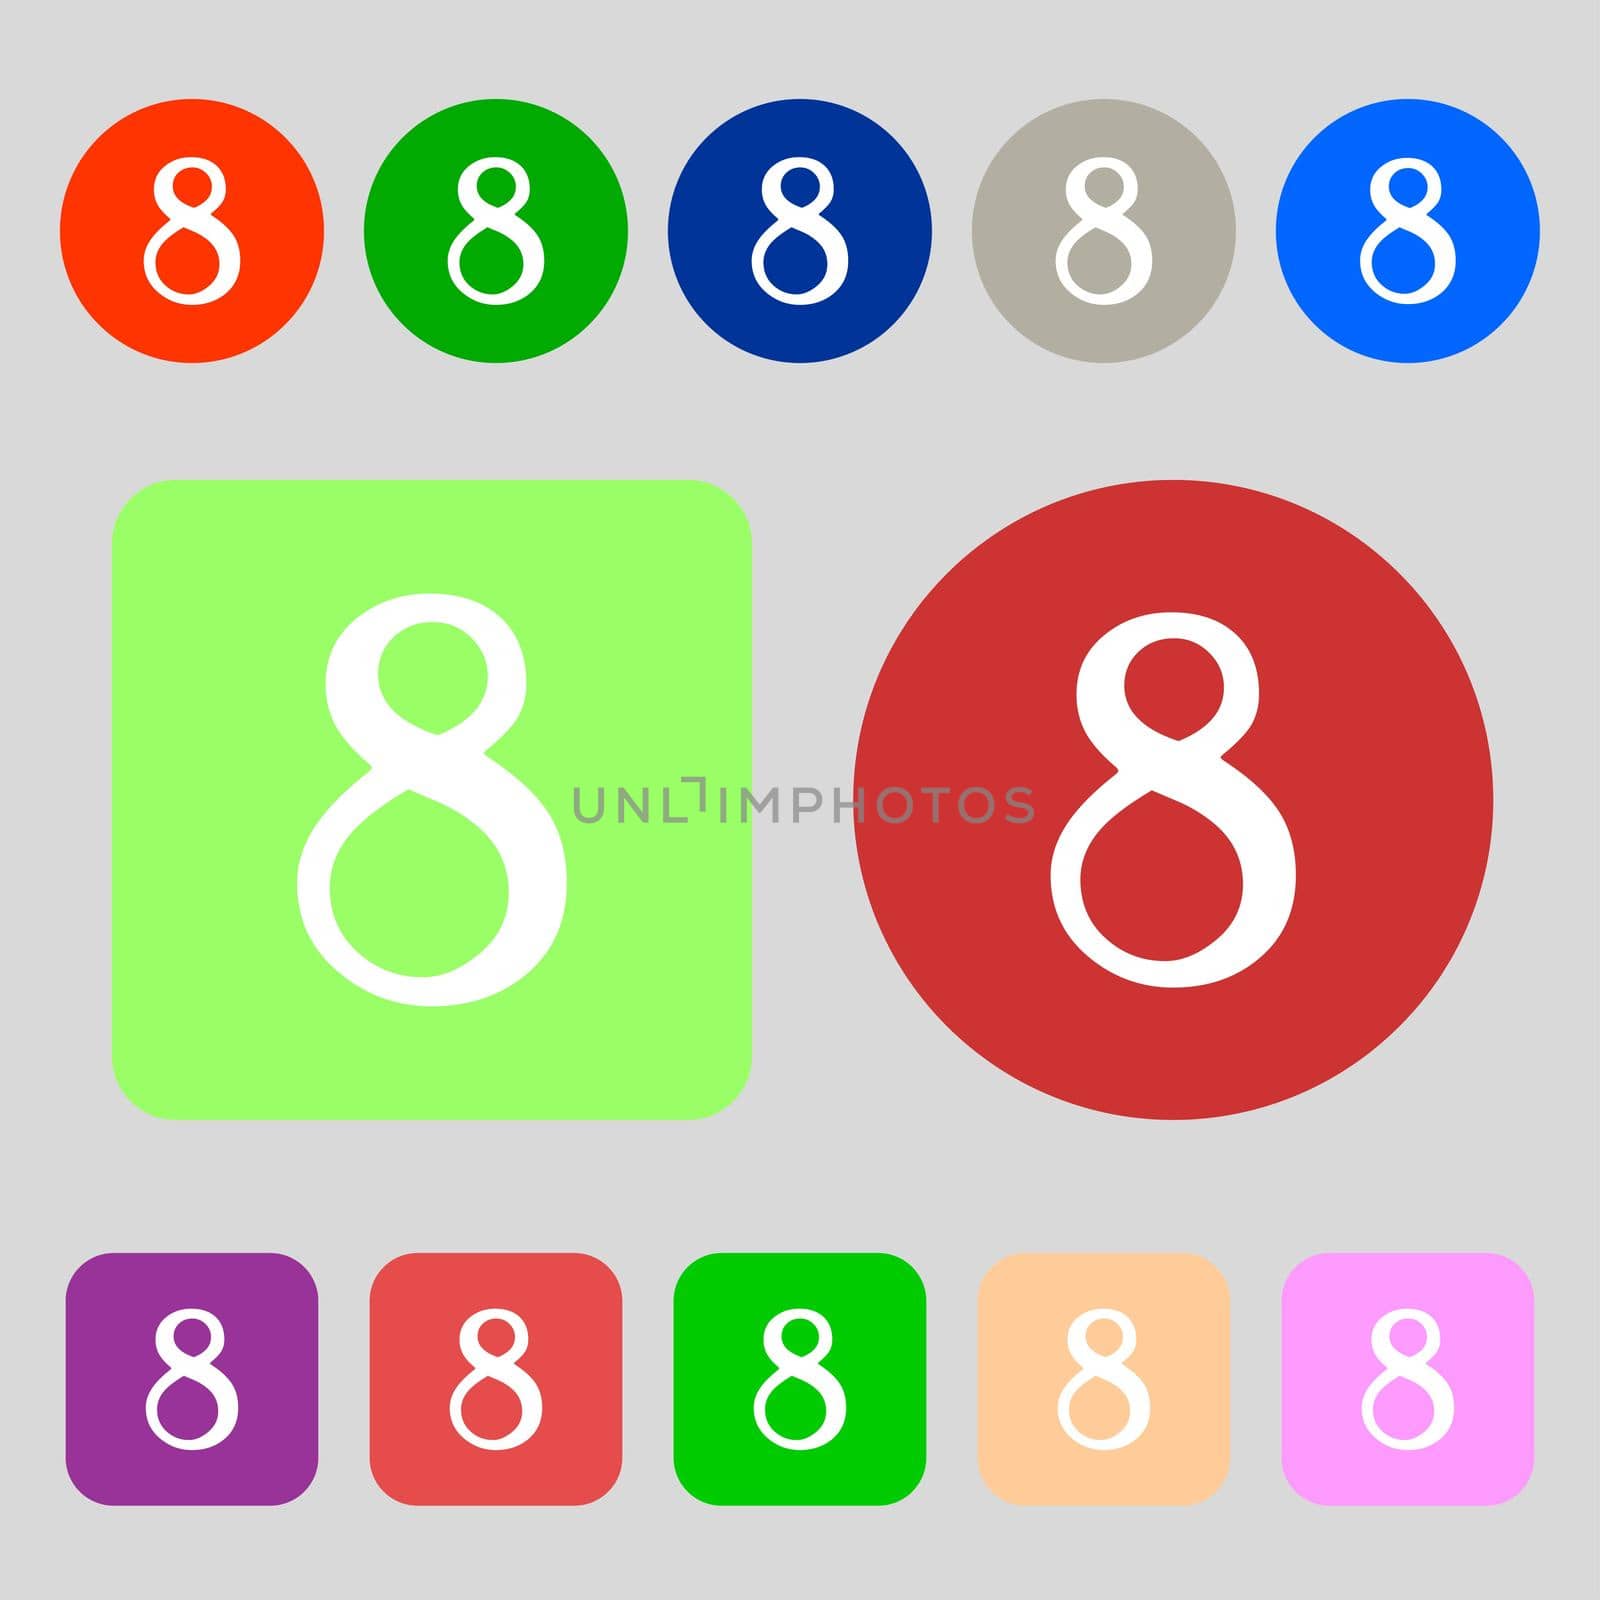 number Eight icon sign.12 colored buttons. Flat design. illustration